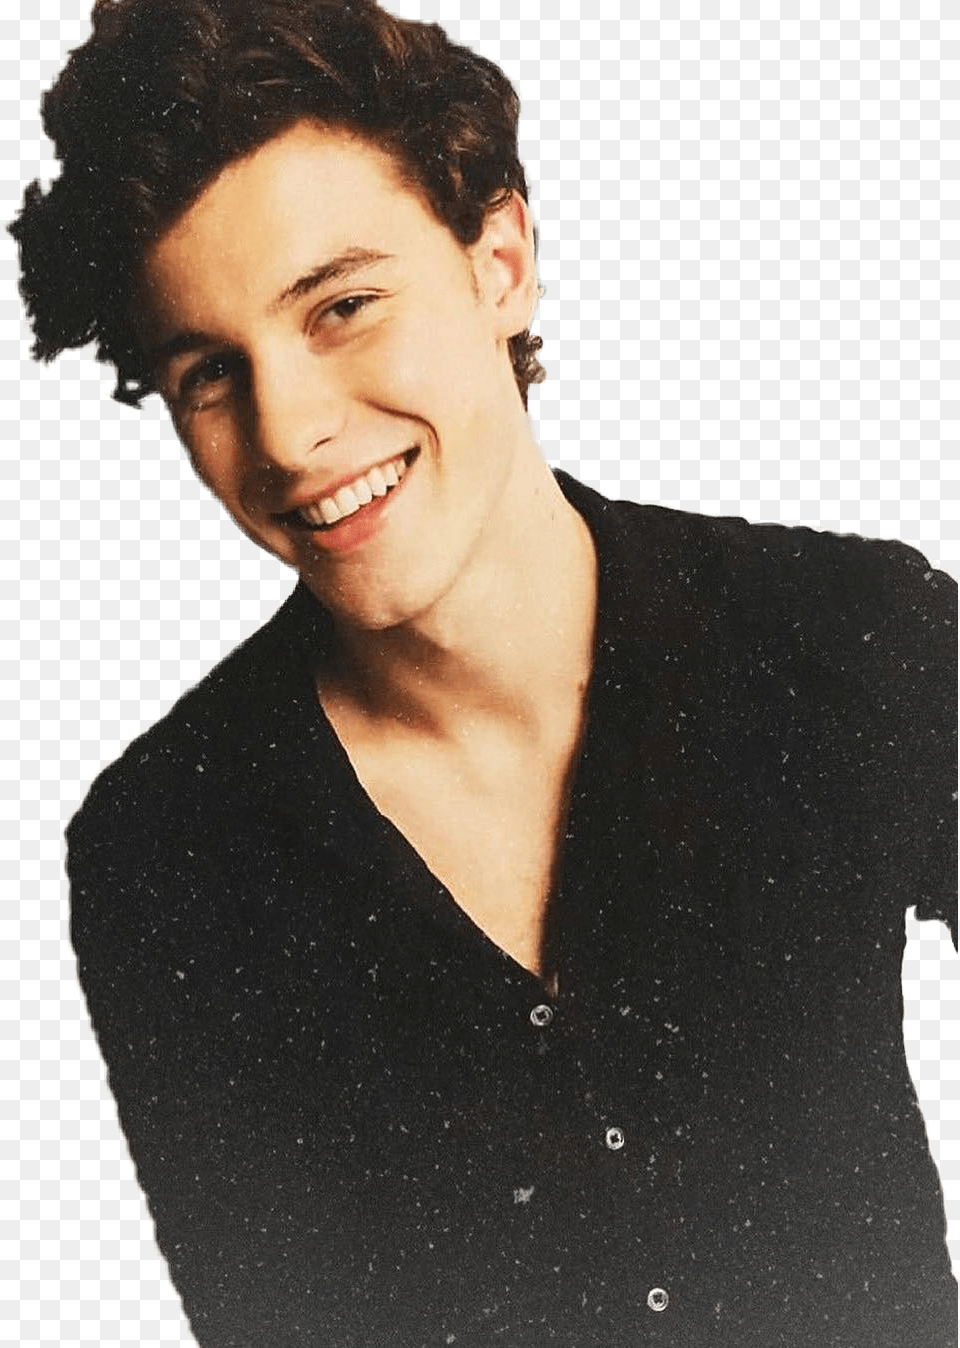 Report Abuse Shawn Mendes, Adult, Smile, Portrait, Photography Png Image